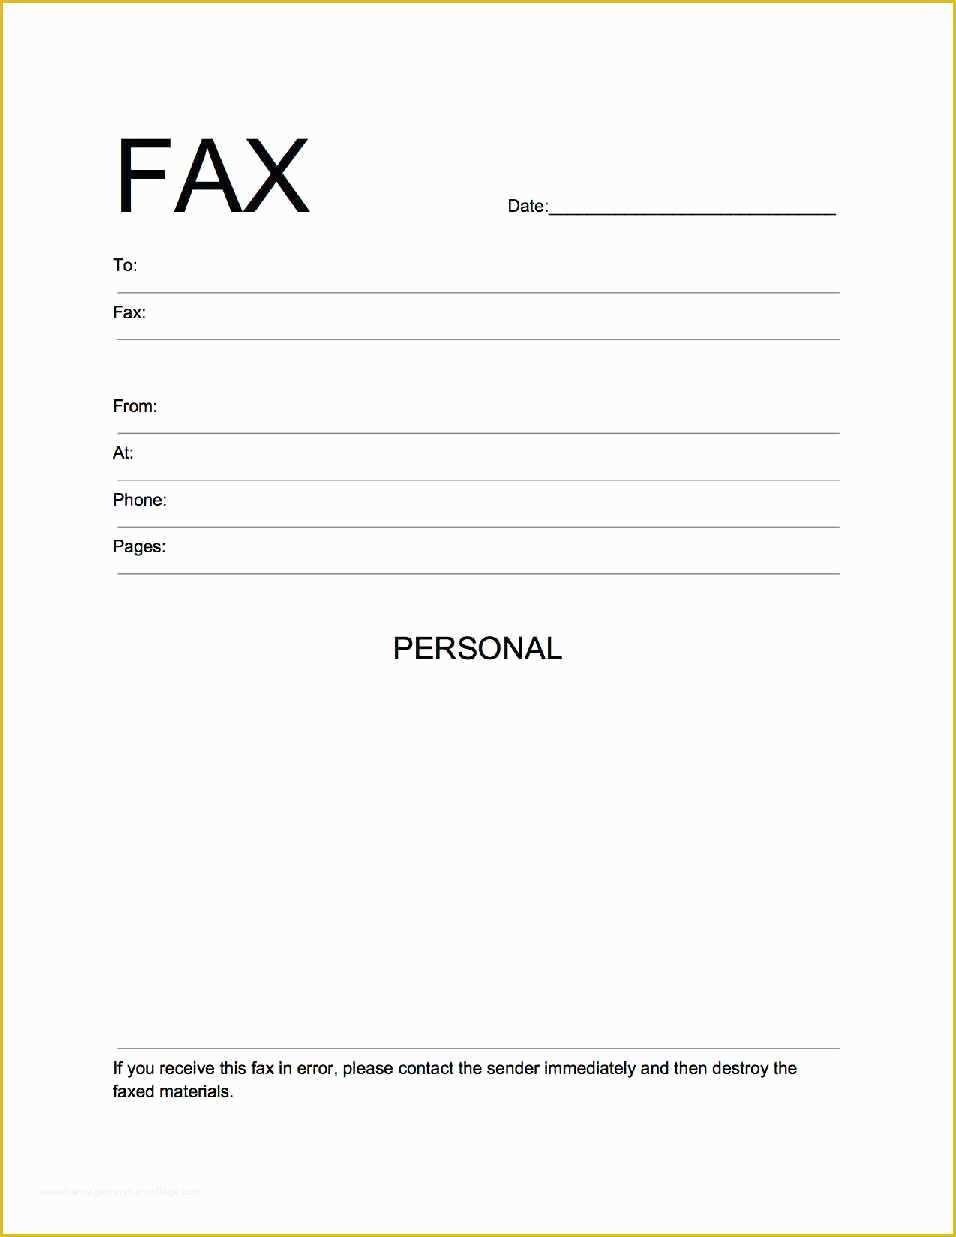 Free Printable Fax Cover Letter Template Of Sample Fax Cover Sheet for All Business Faxing Needs